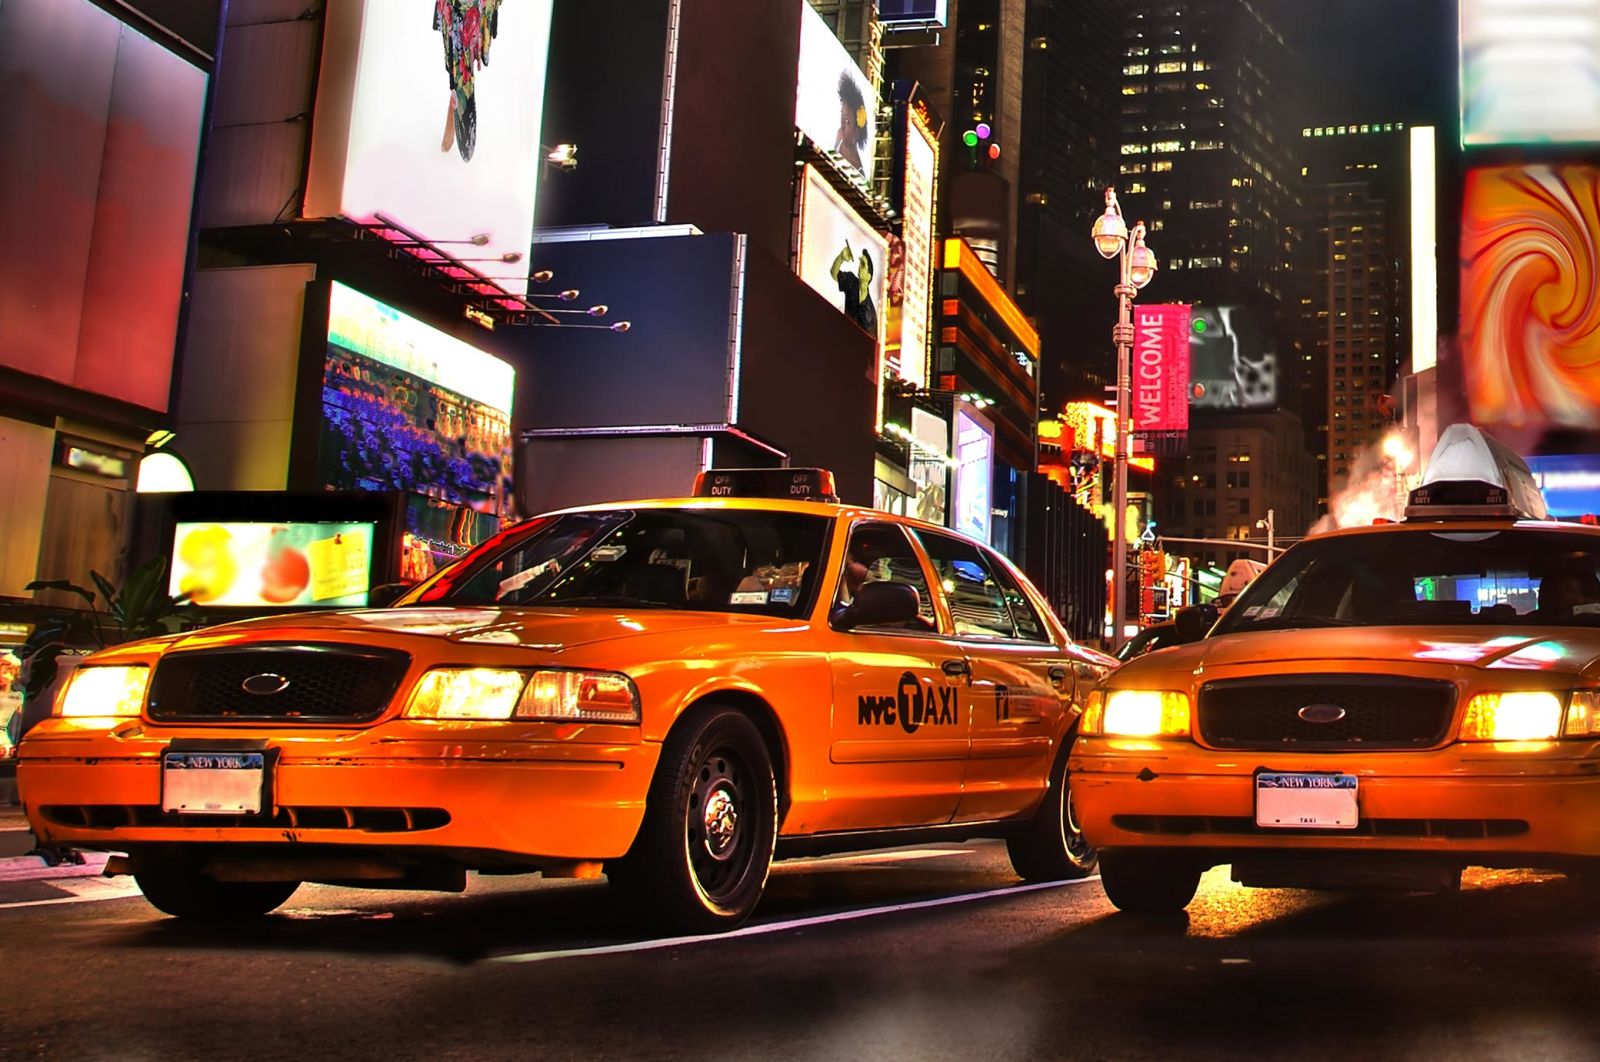 Illustration for article titled Last chance to ride in a Ford Crown Victoria NYC Taxi